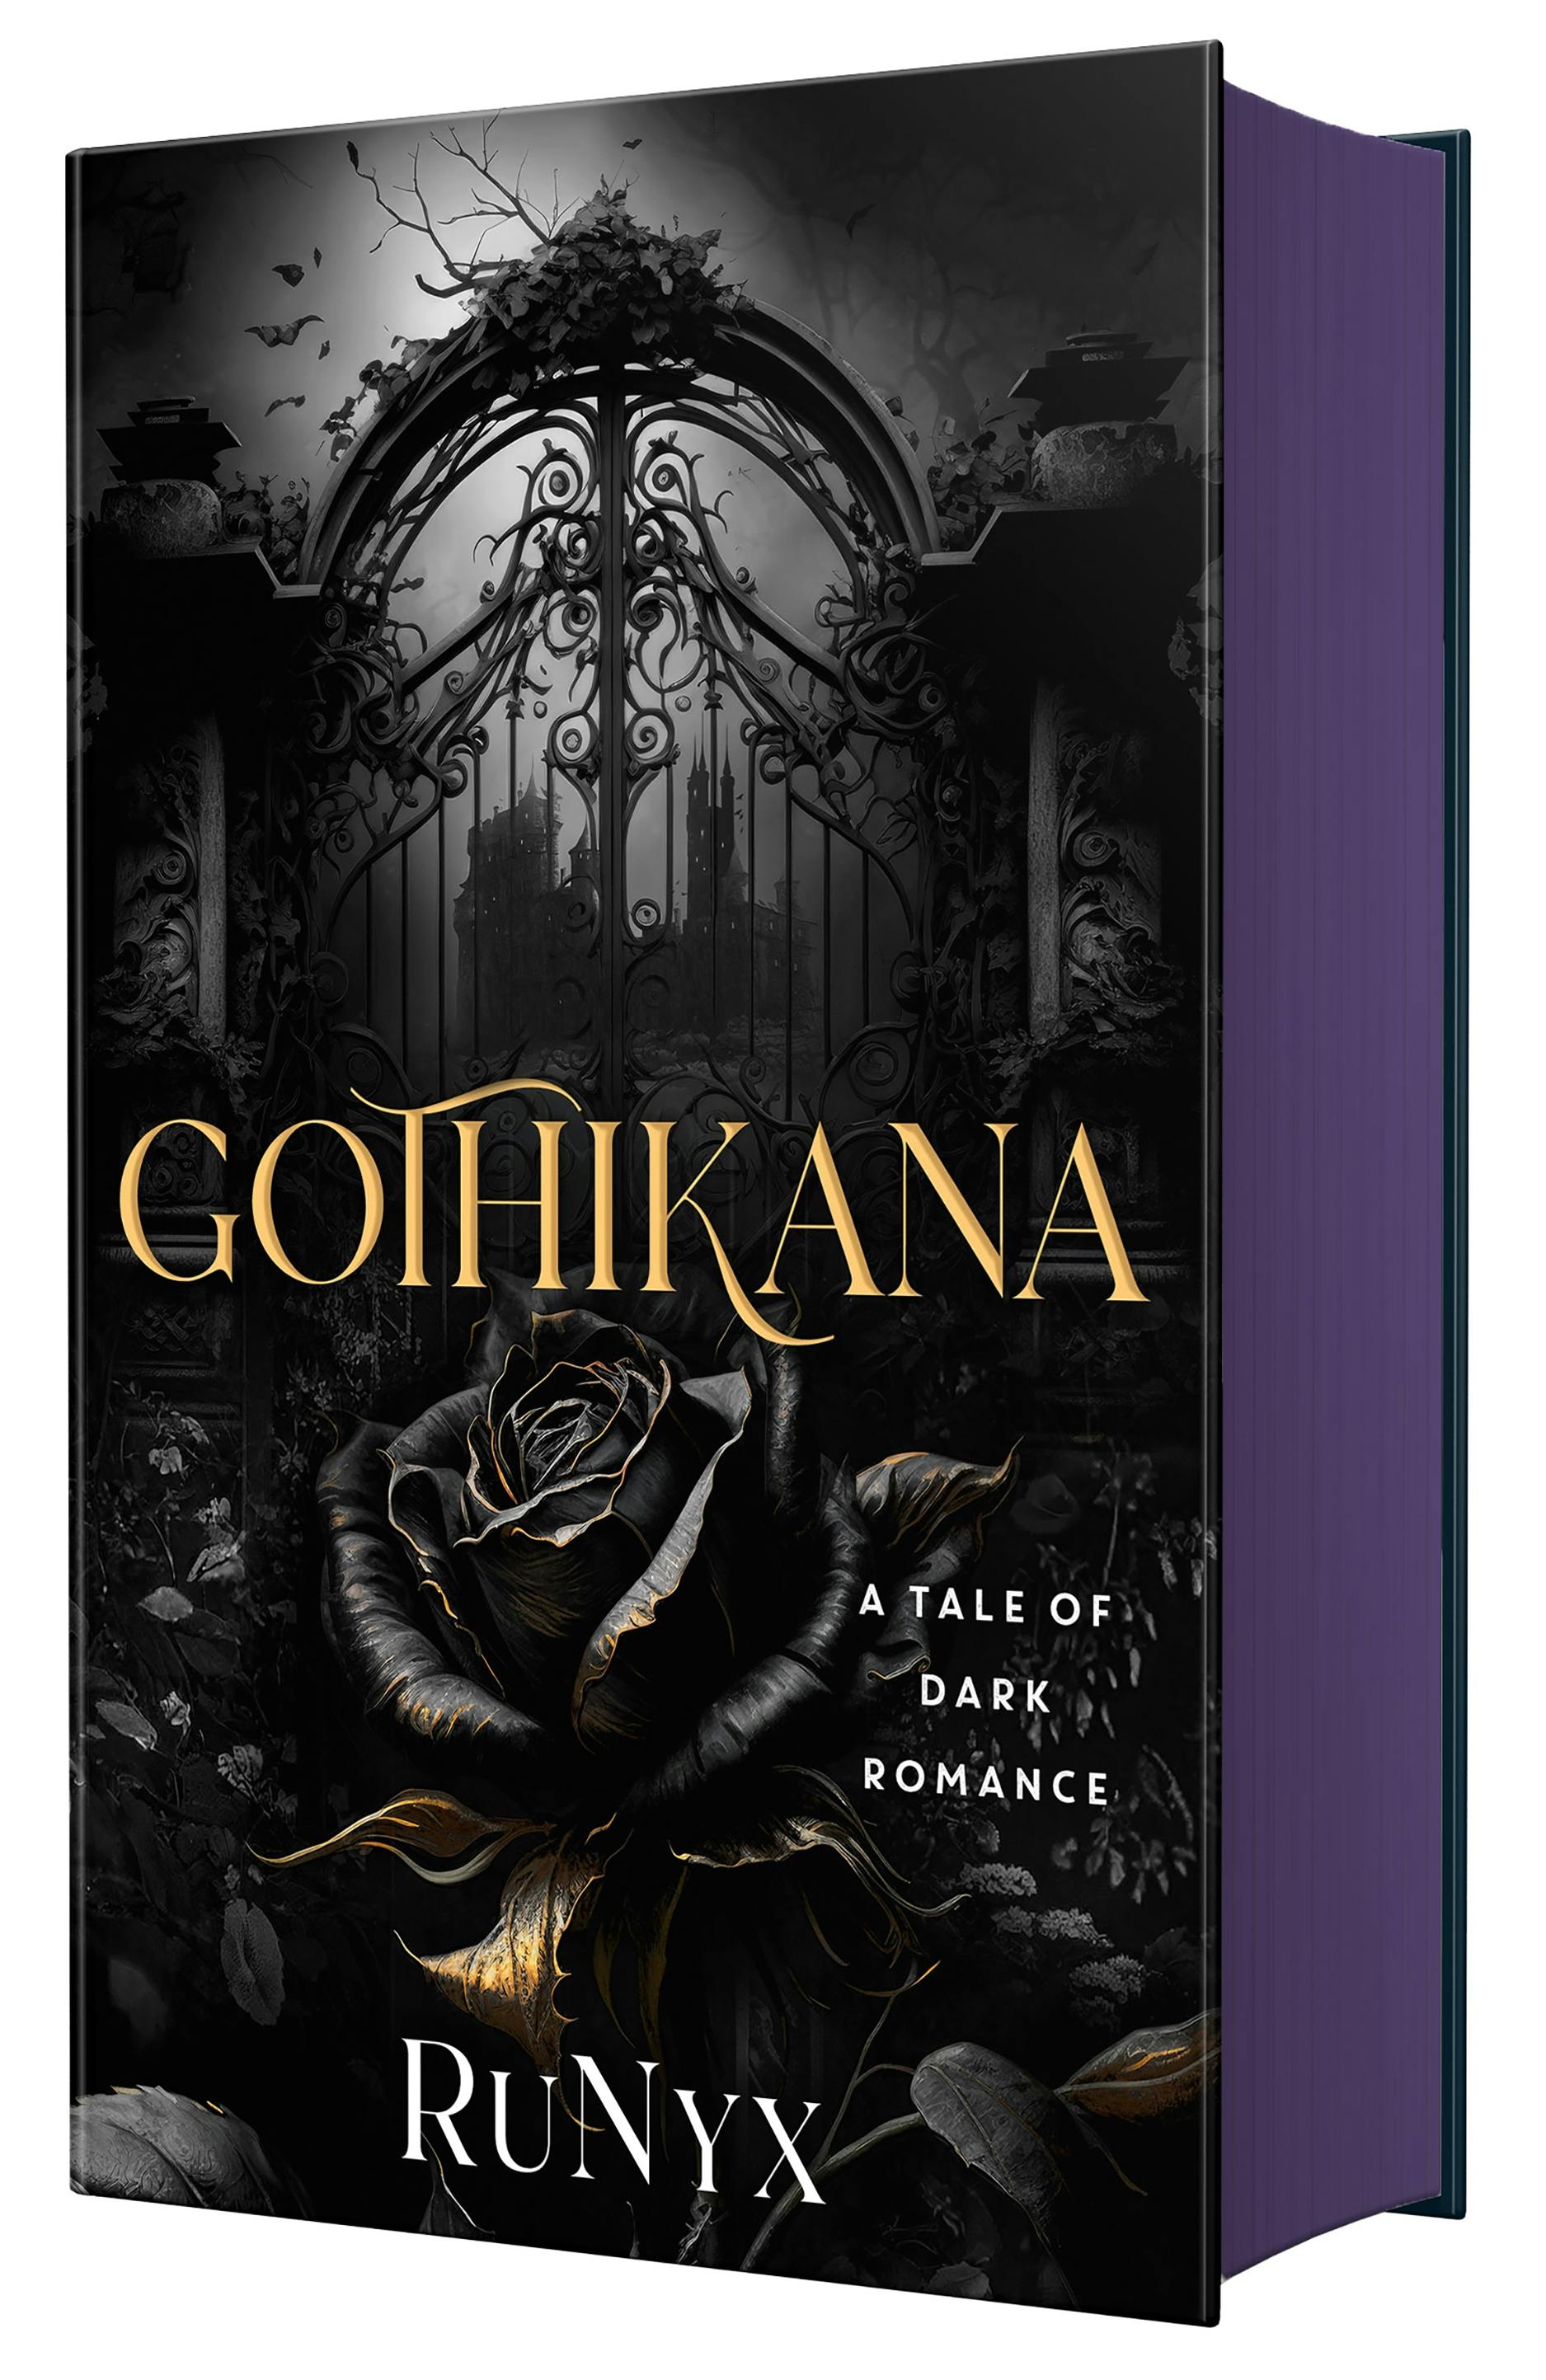 Cover for the book titled as: Gothikana